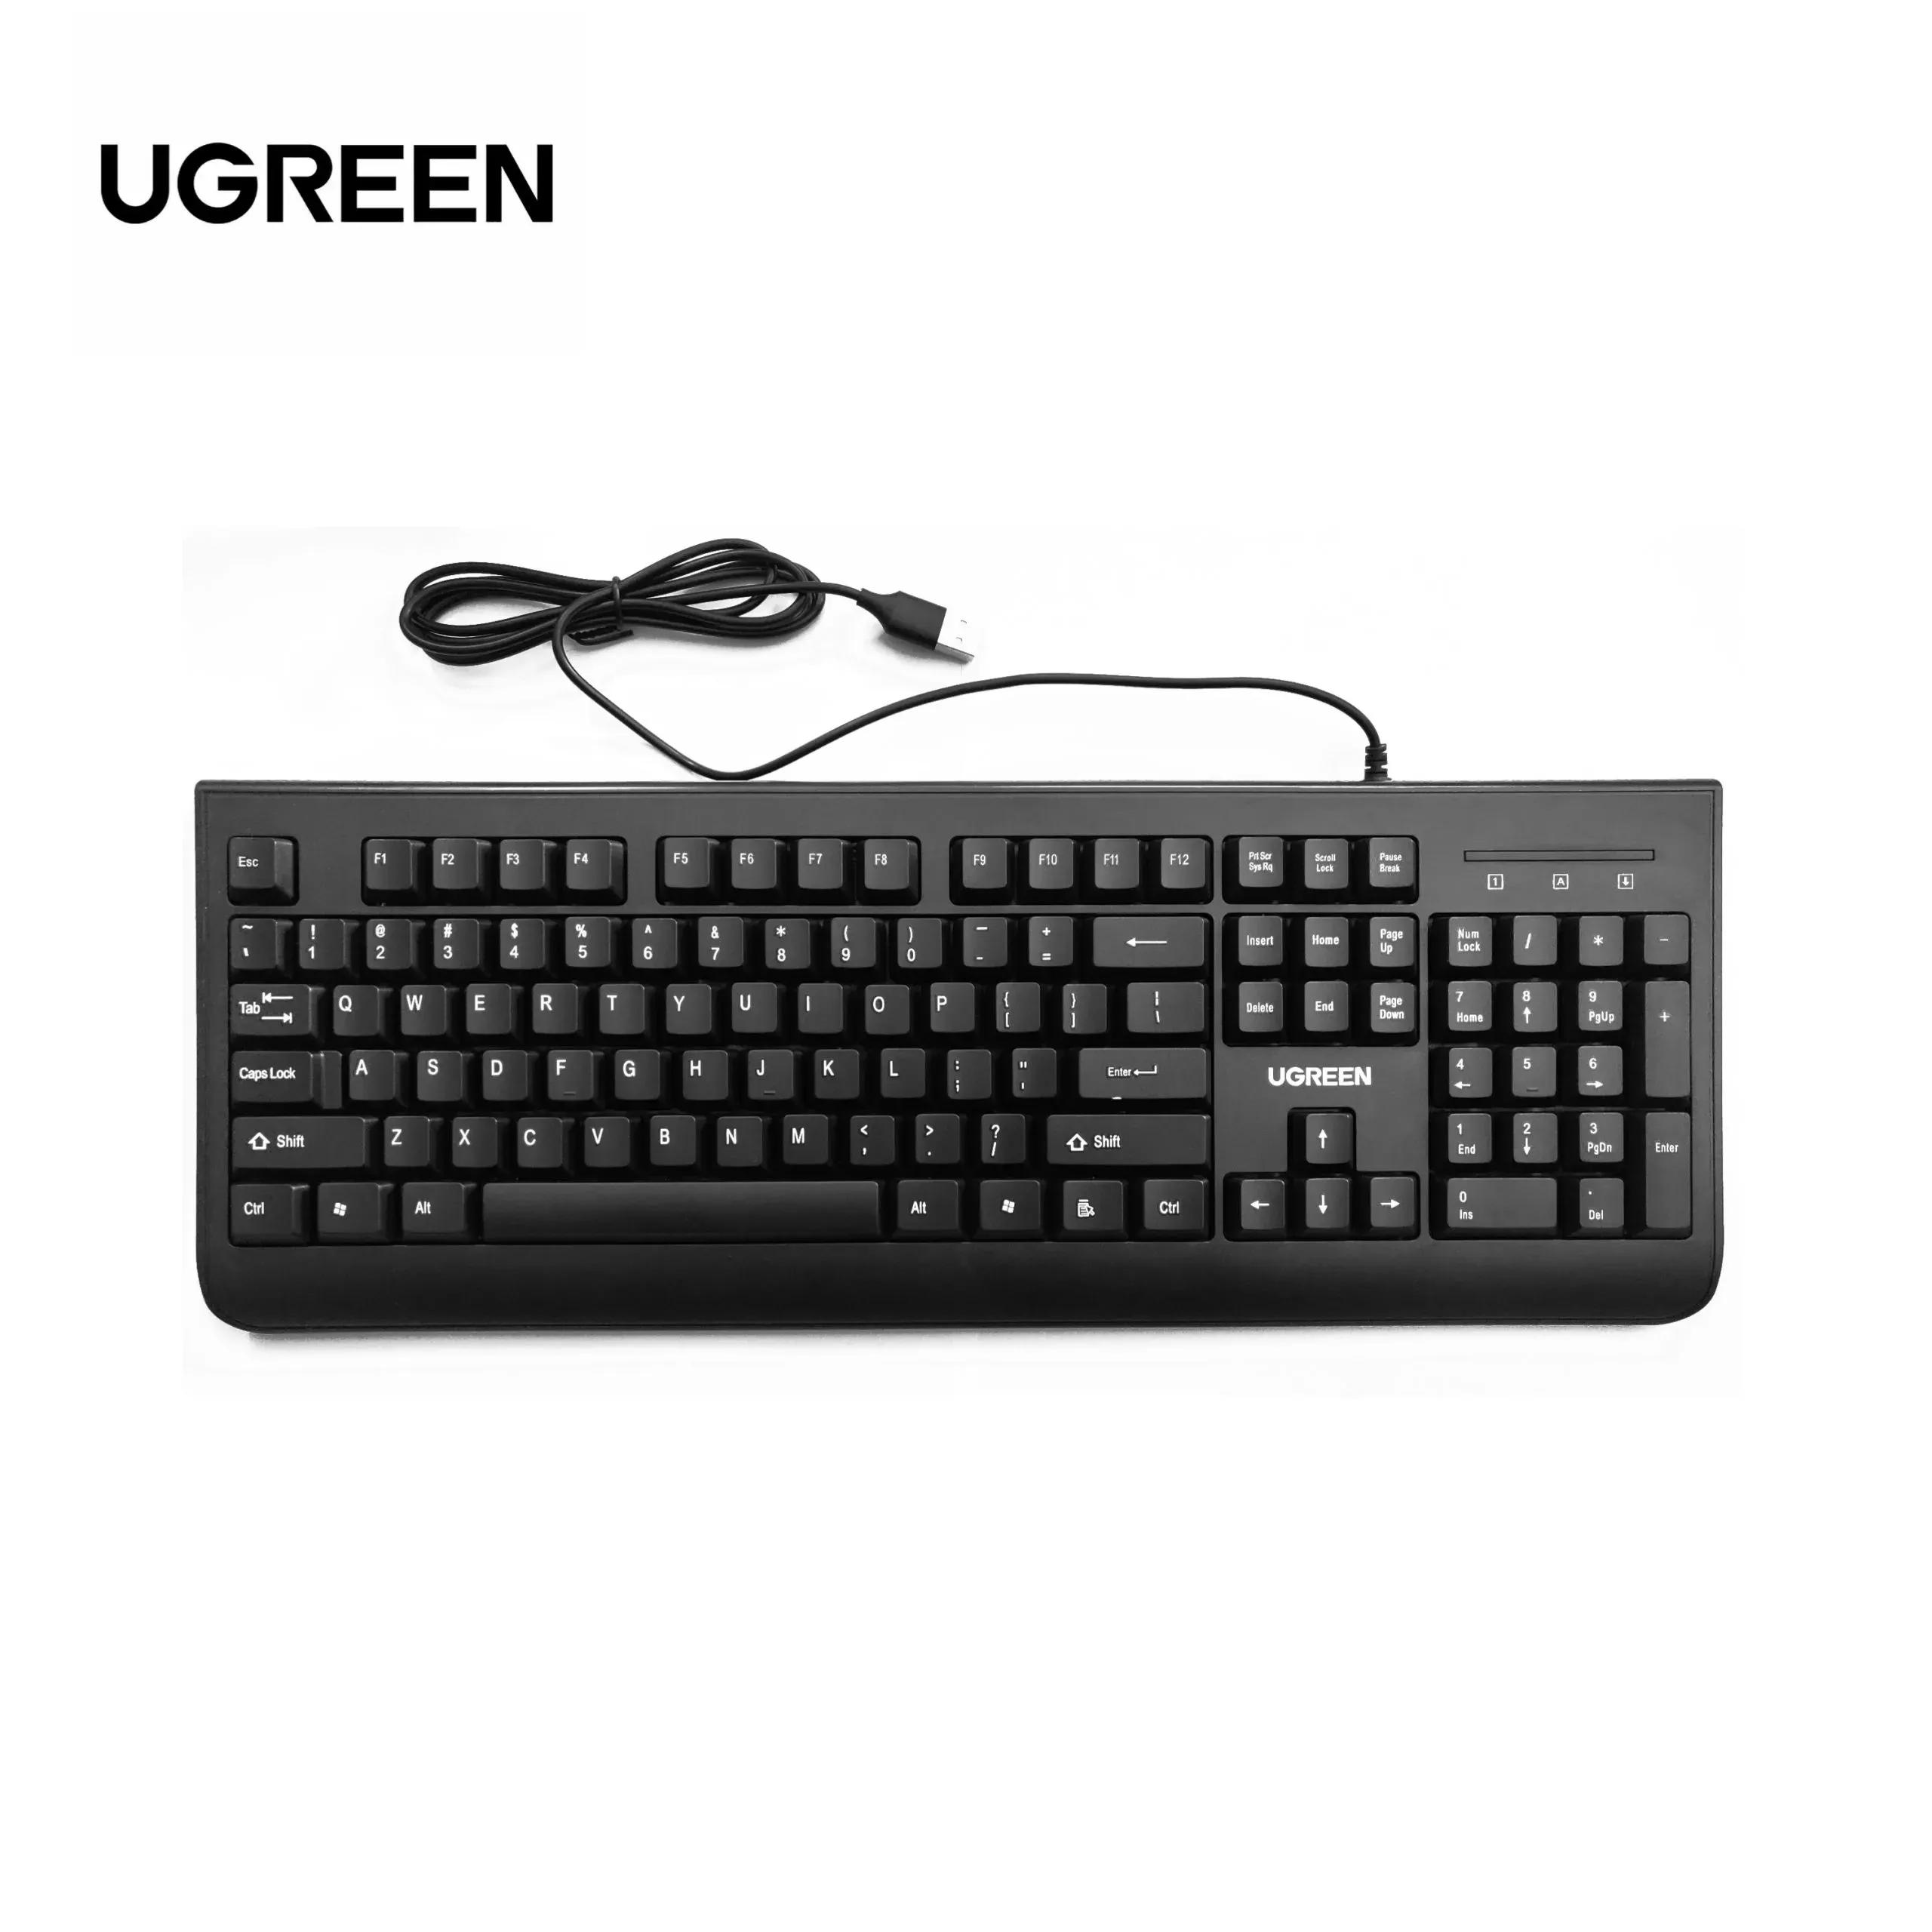 UGREEN Wired Mouse and Keyboard Combo